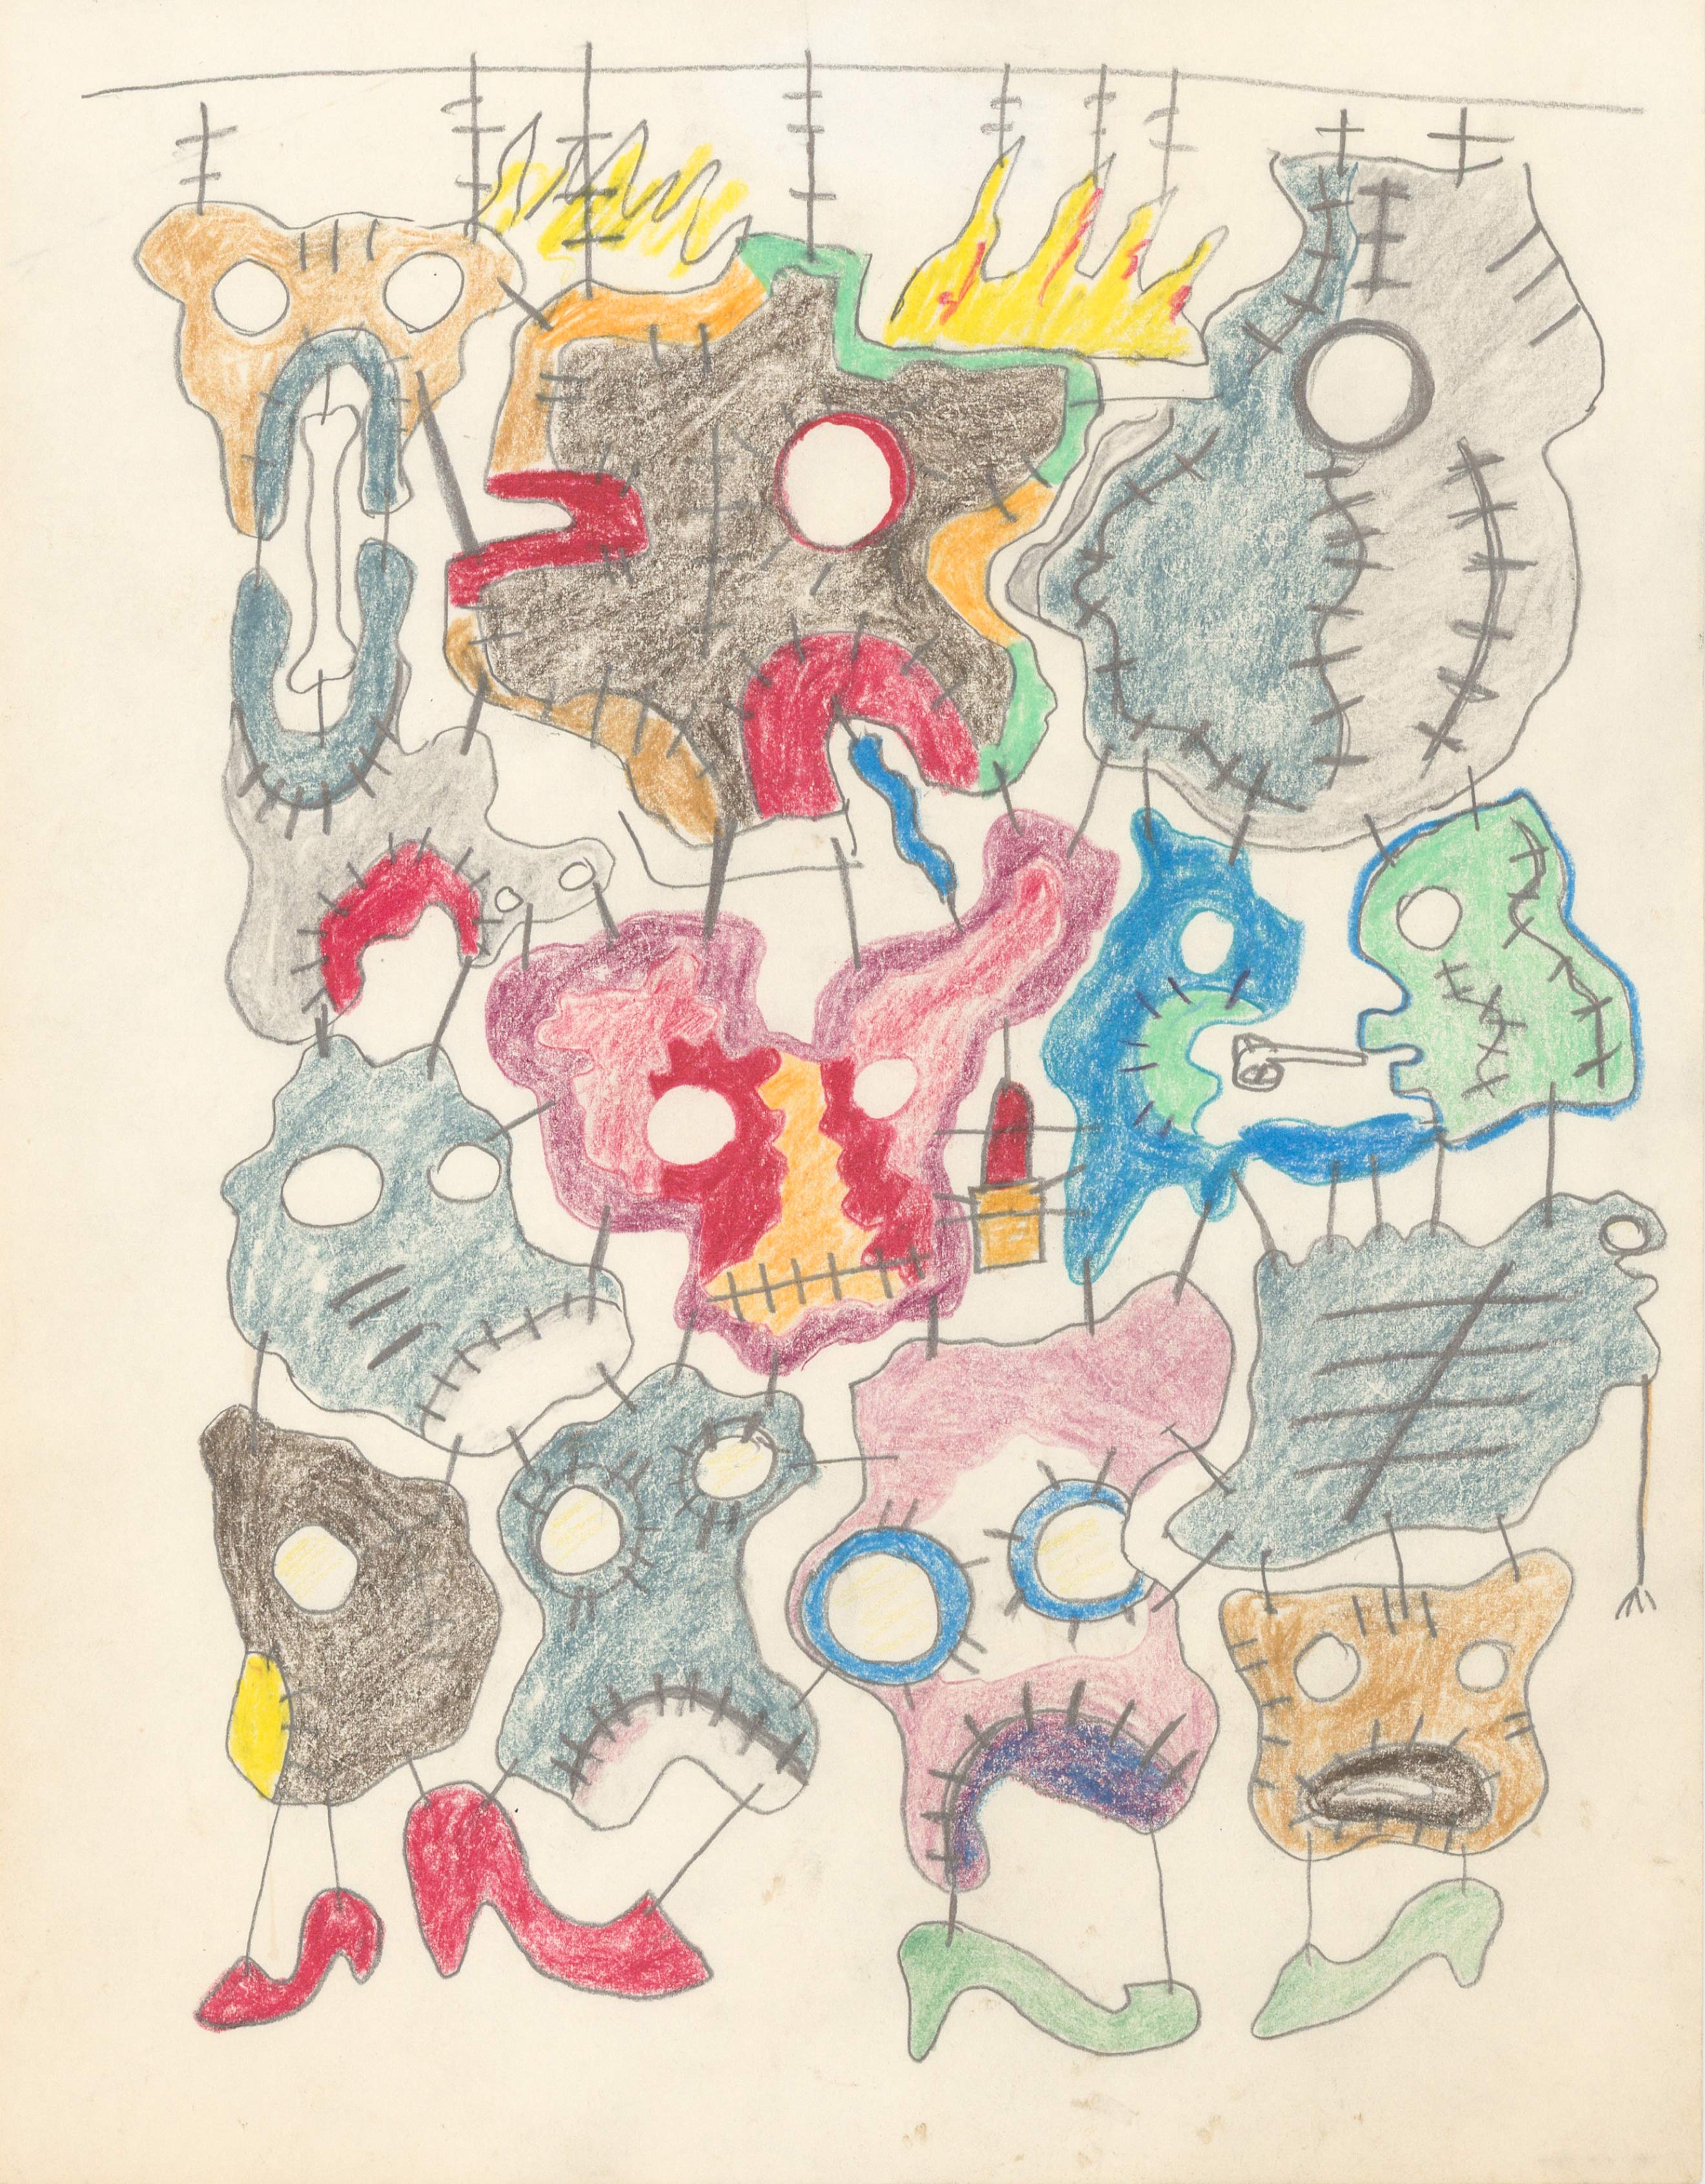 One of Moki Cherry's sketches on paper. Coloured and stitched irregular shapes, like blobs or stones, stitched together, in a palette of solid pastel colours